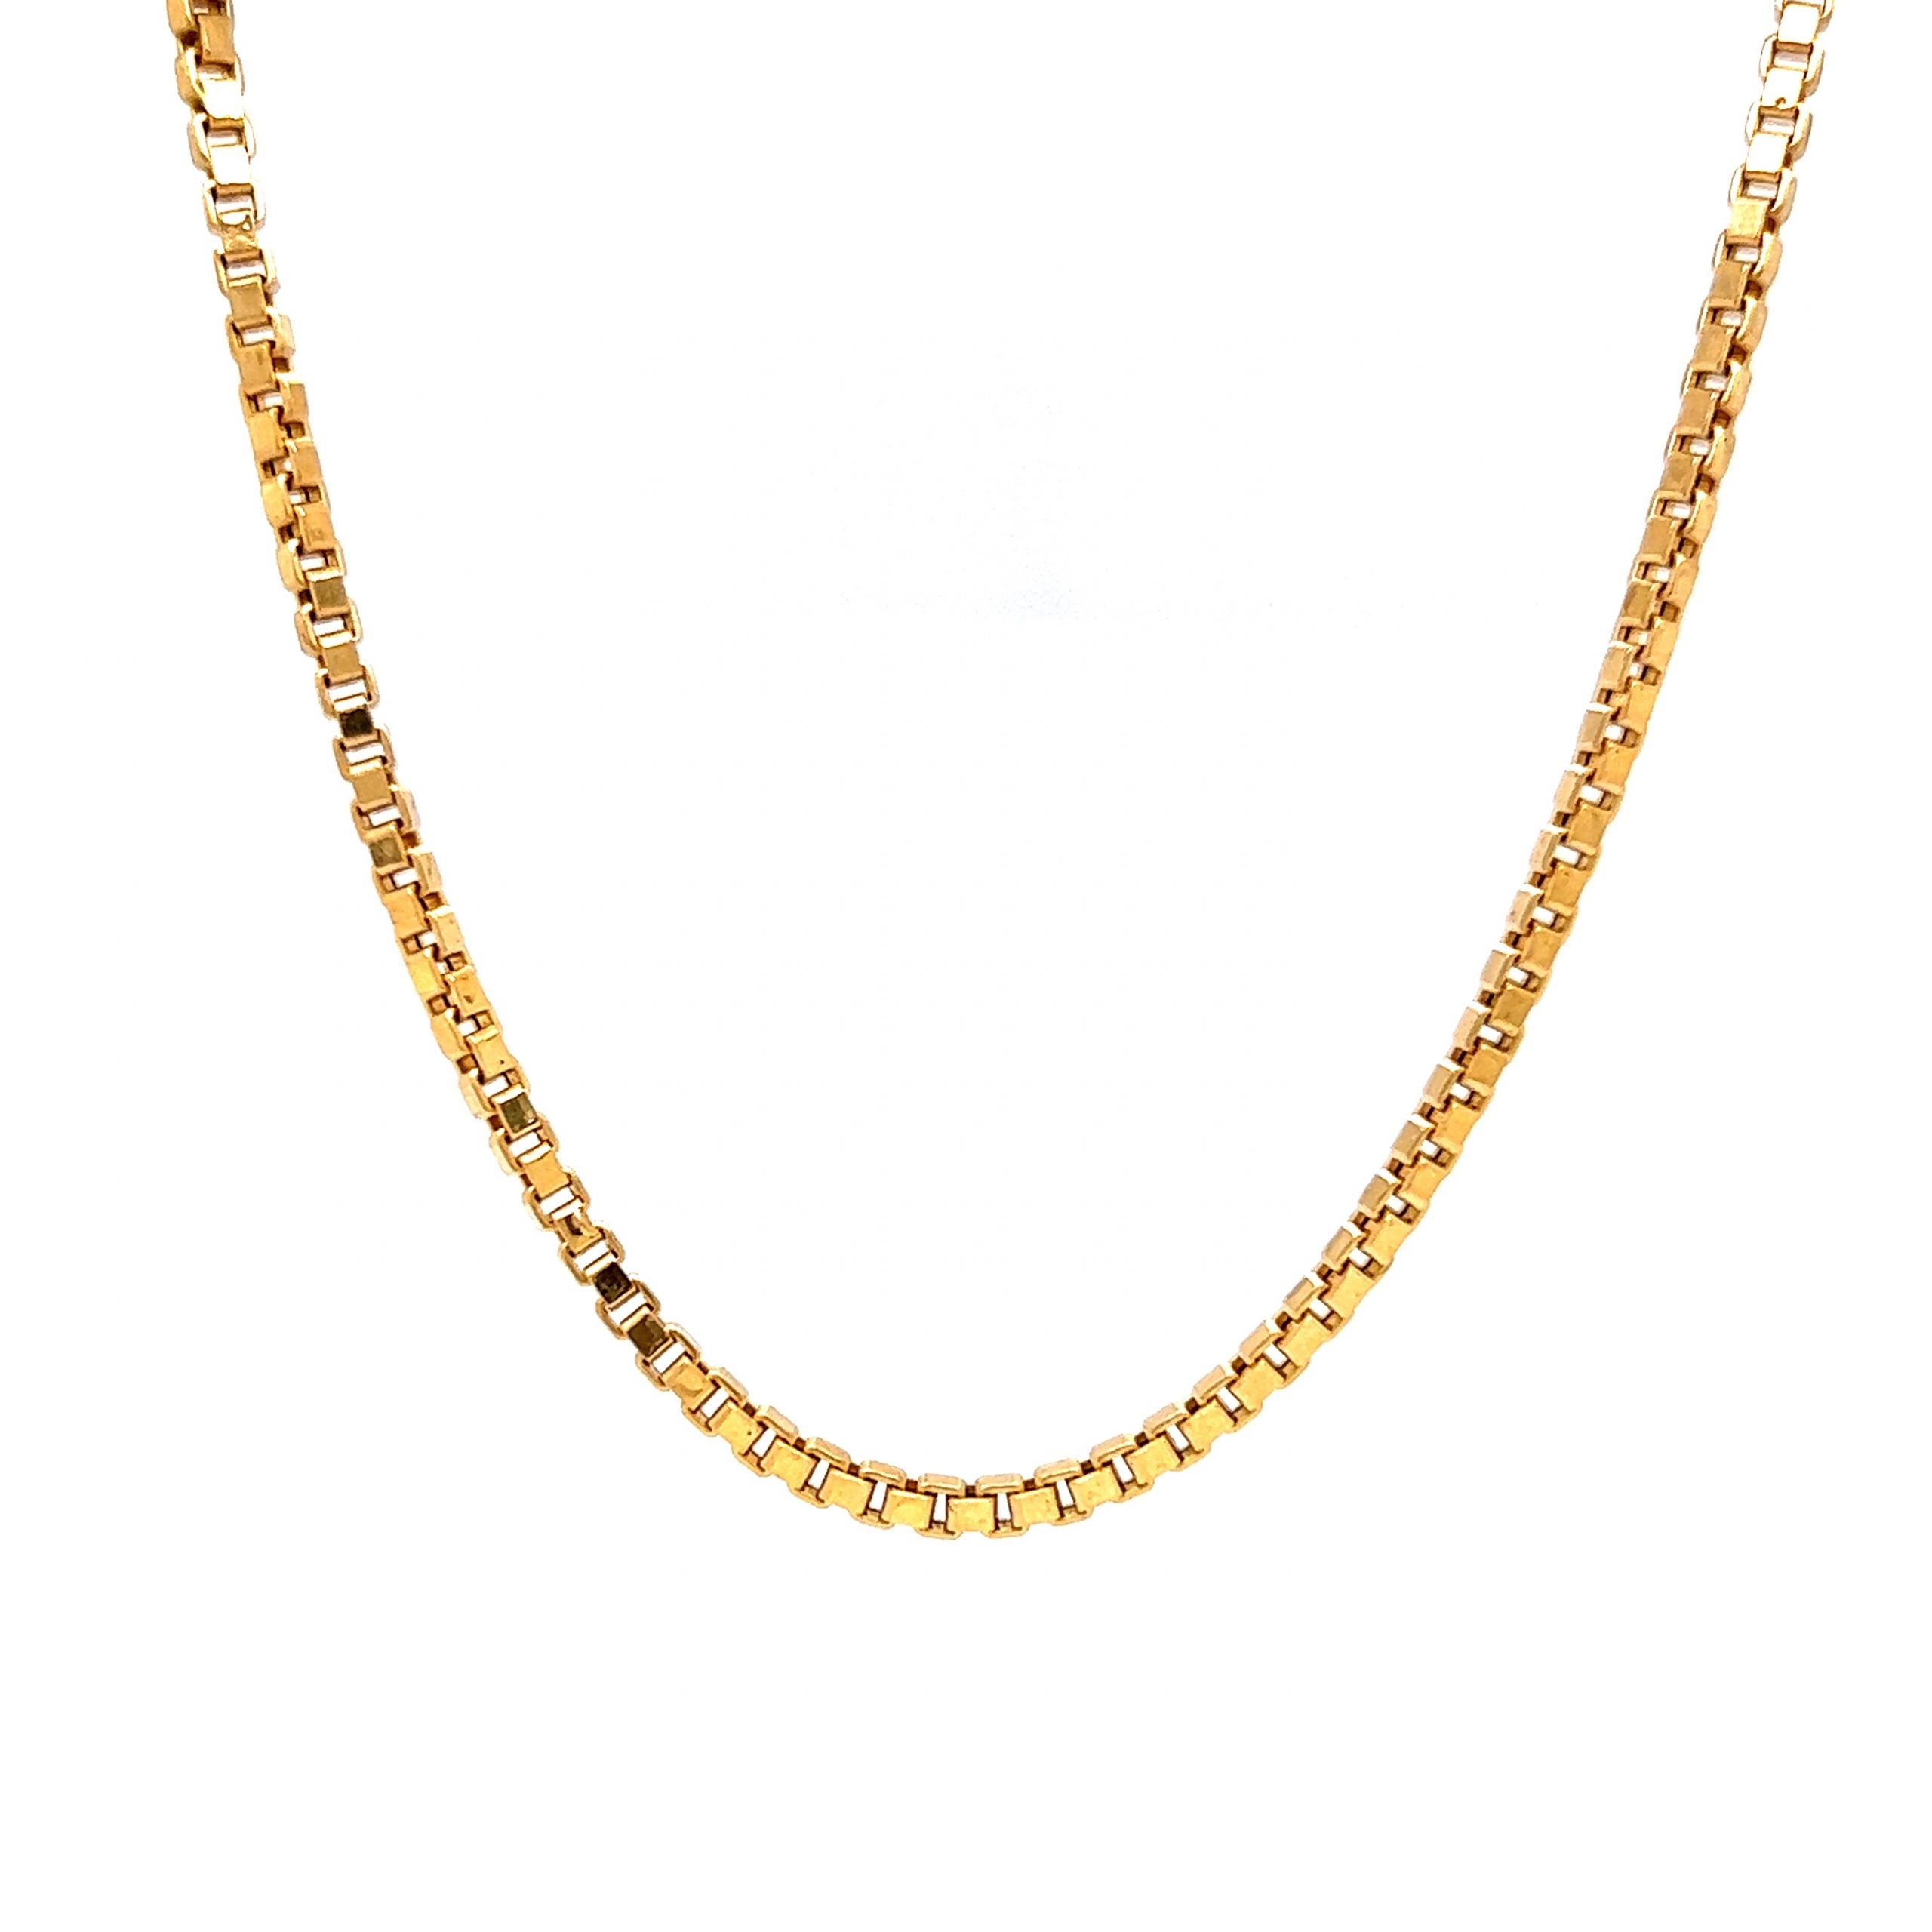 14k Yellow Gold 5mm Round Box Chain Necklace 26 Inches | Sarraf.com